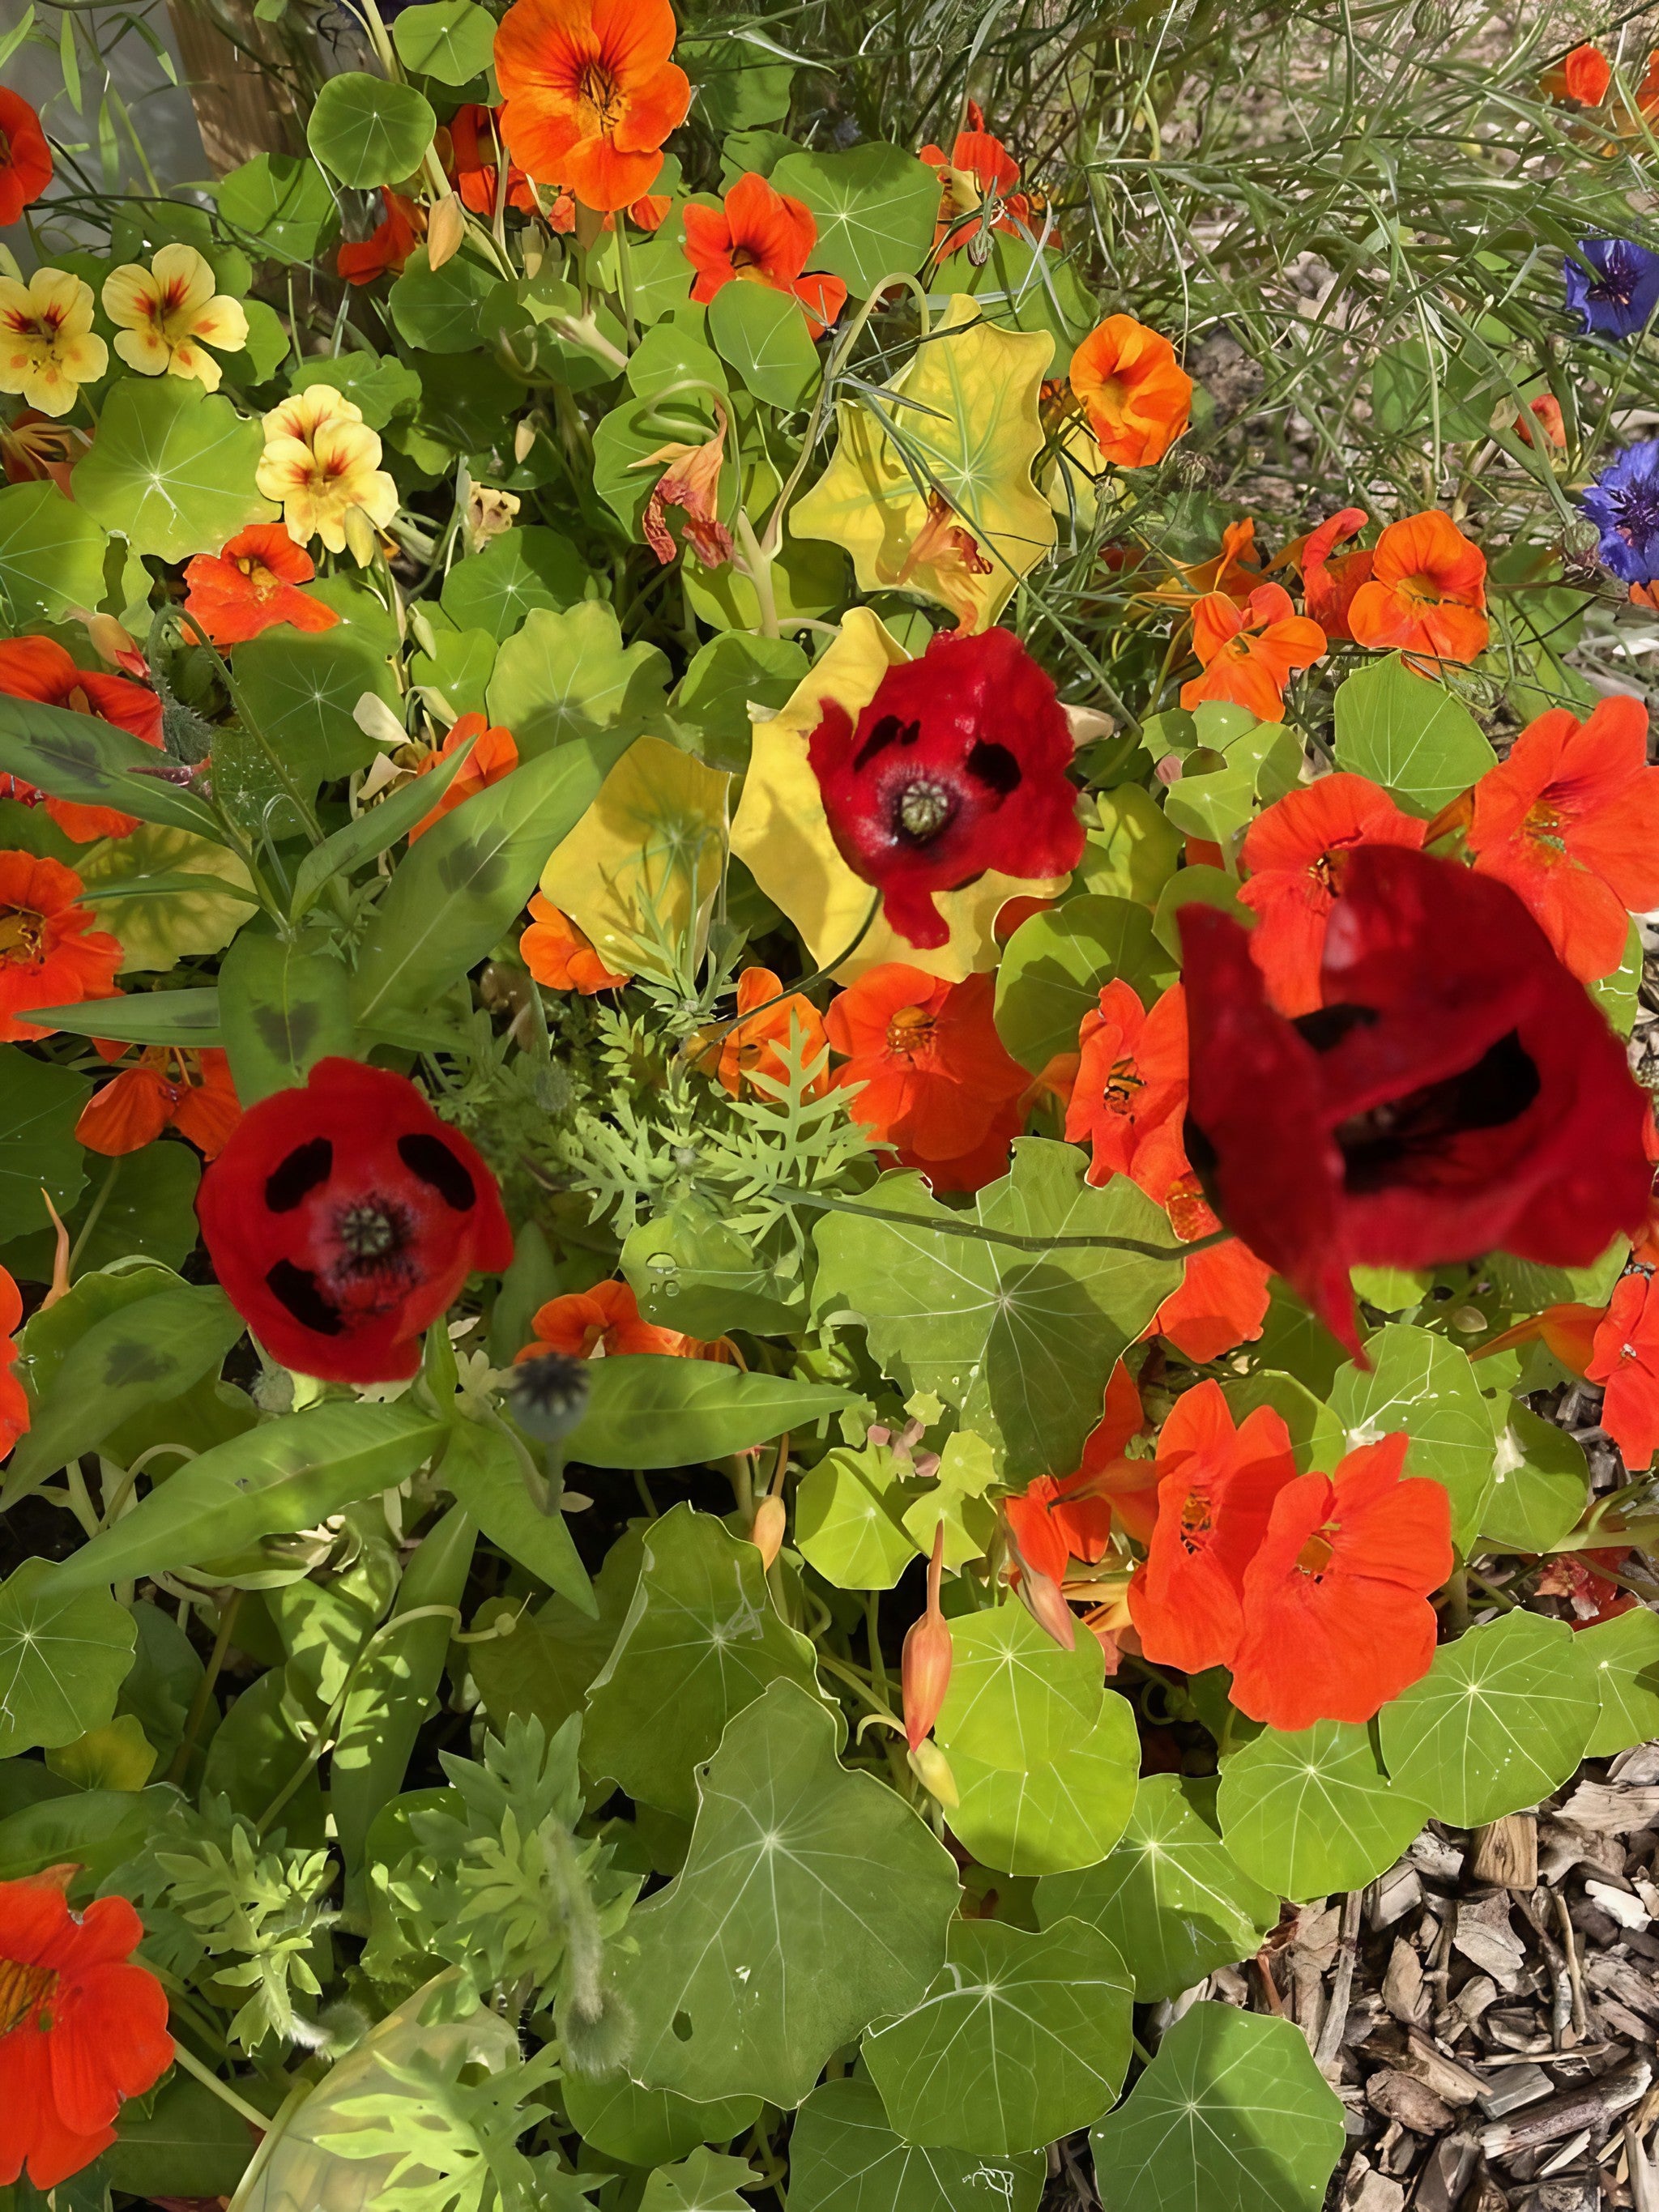 Assortment of red and orange Poppy Ladybird flowers in a lush garden